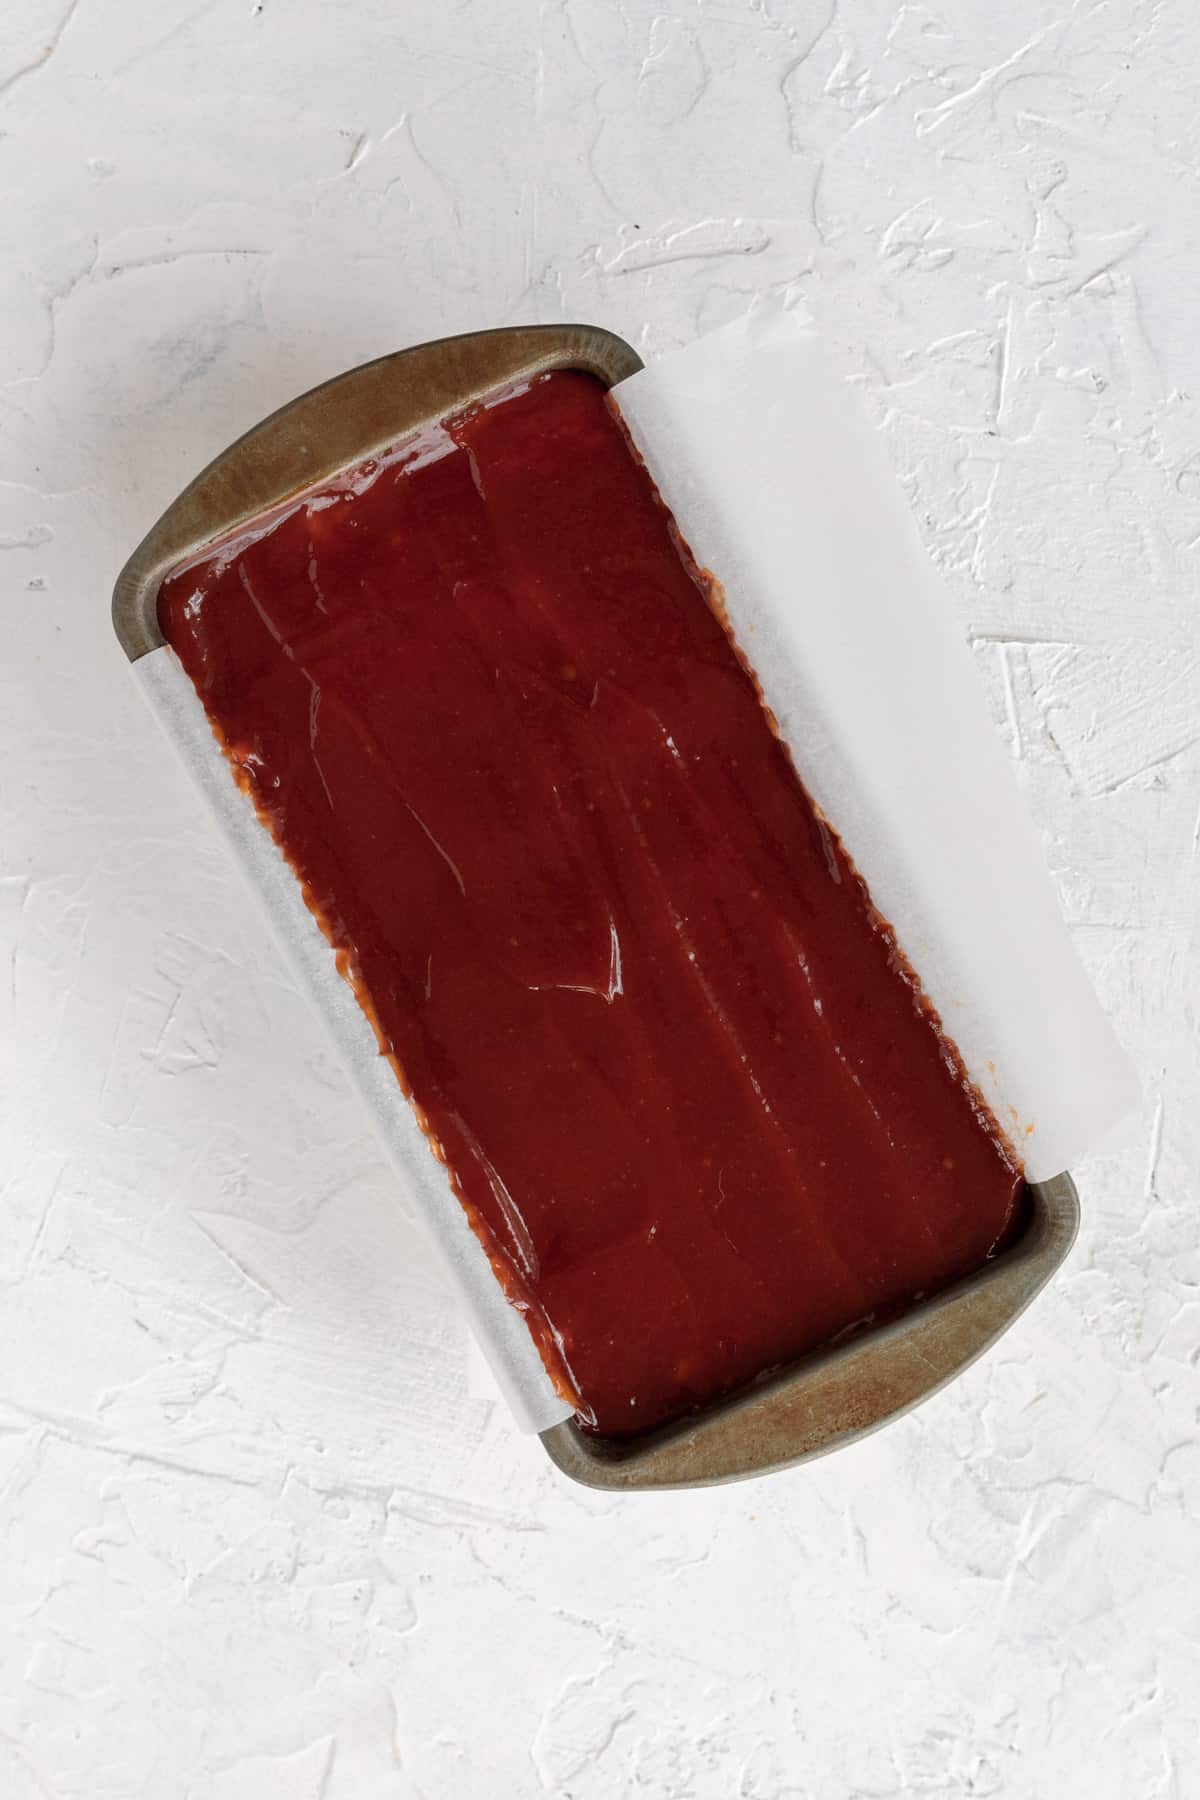 Uncooked meatloaf in a loaf pan topped with a ketchup glaze before going in the oven.